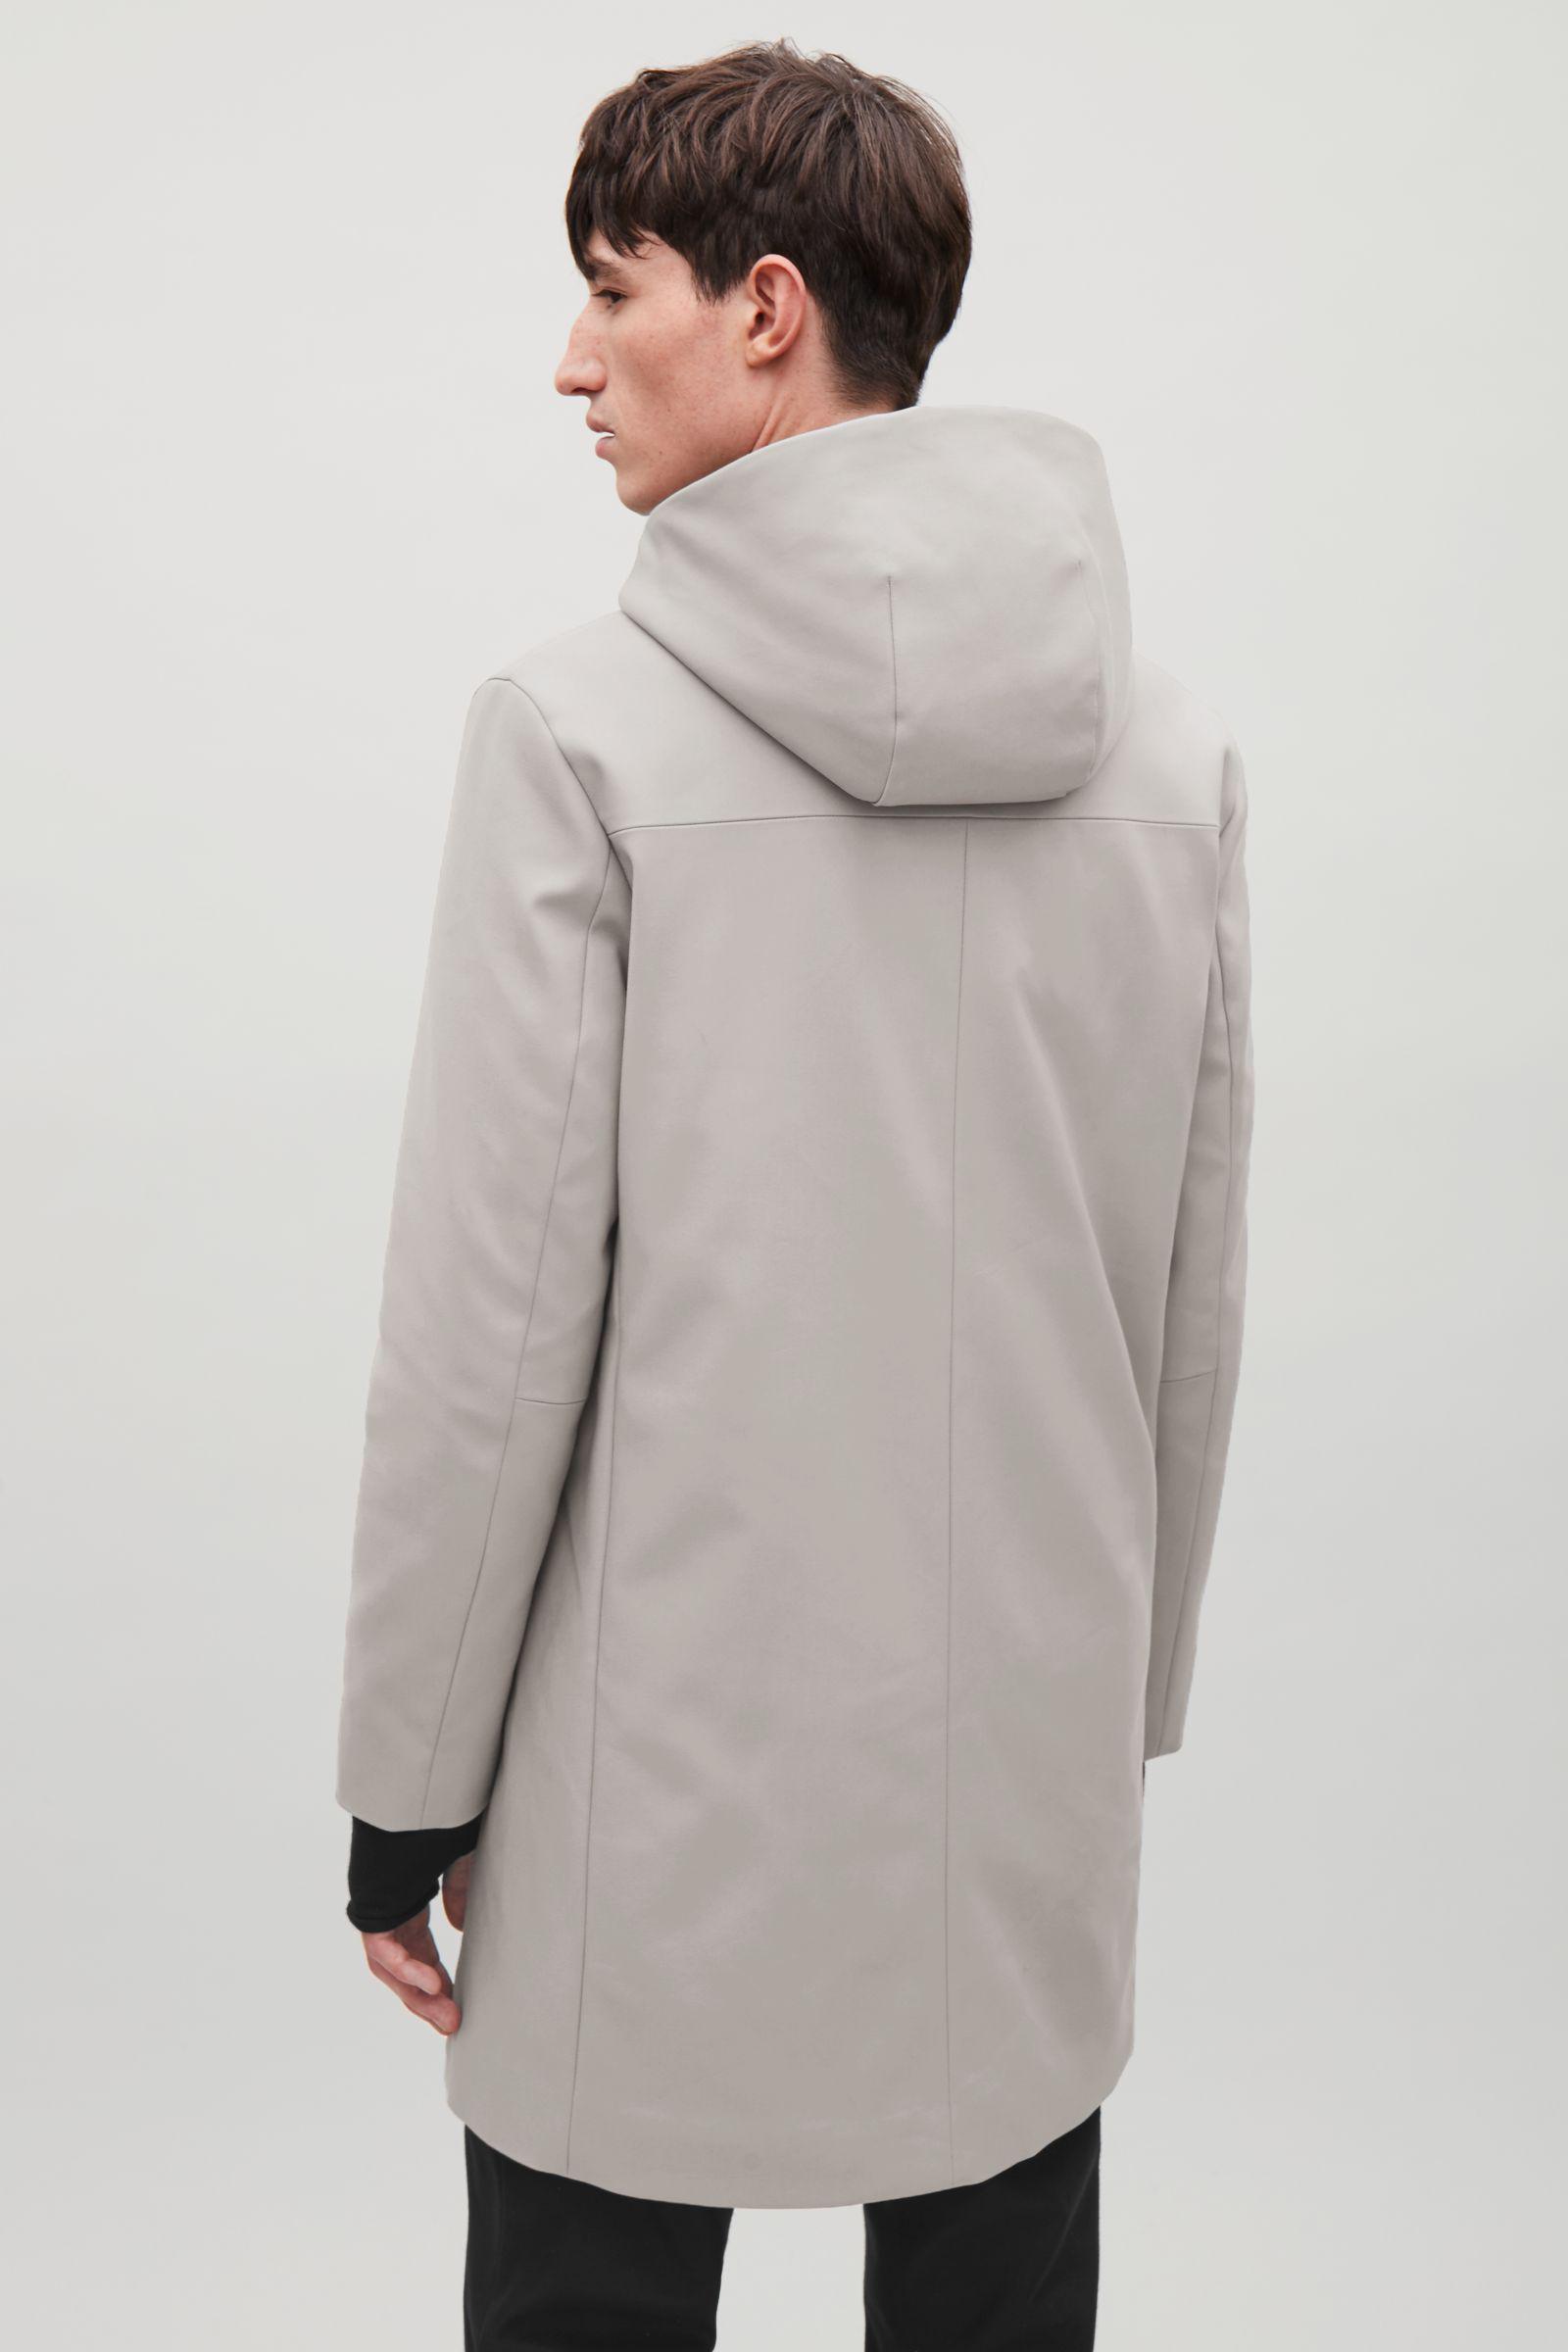 COS Padded Cotton Parka in Grey (Gray) for Men - Lyst